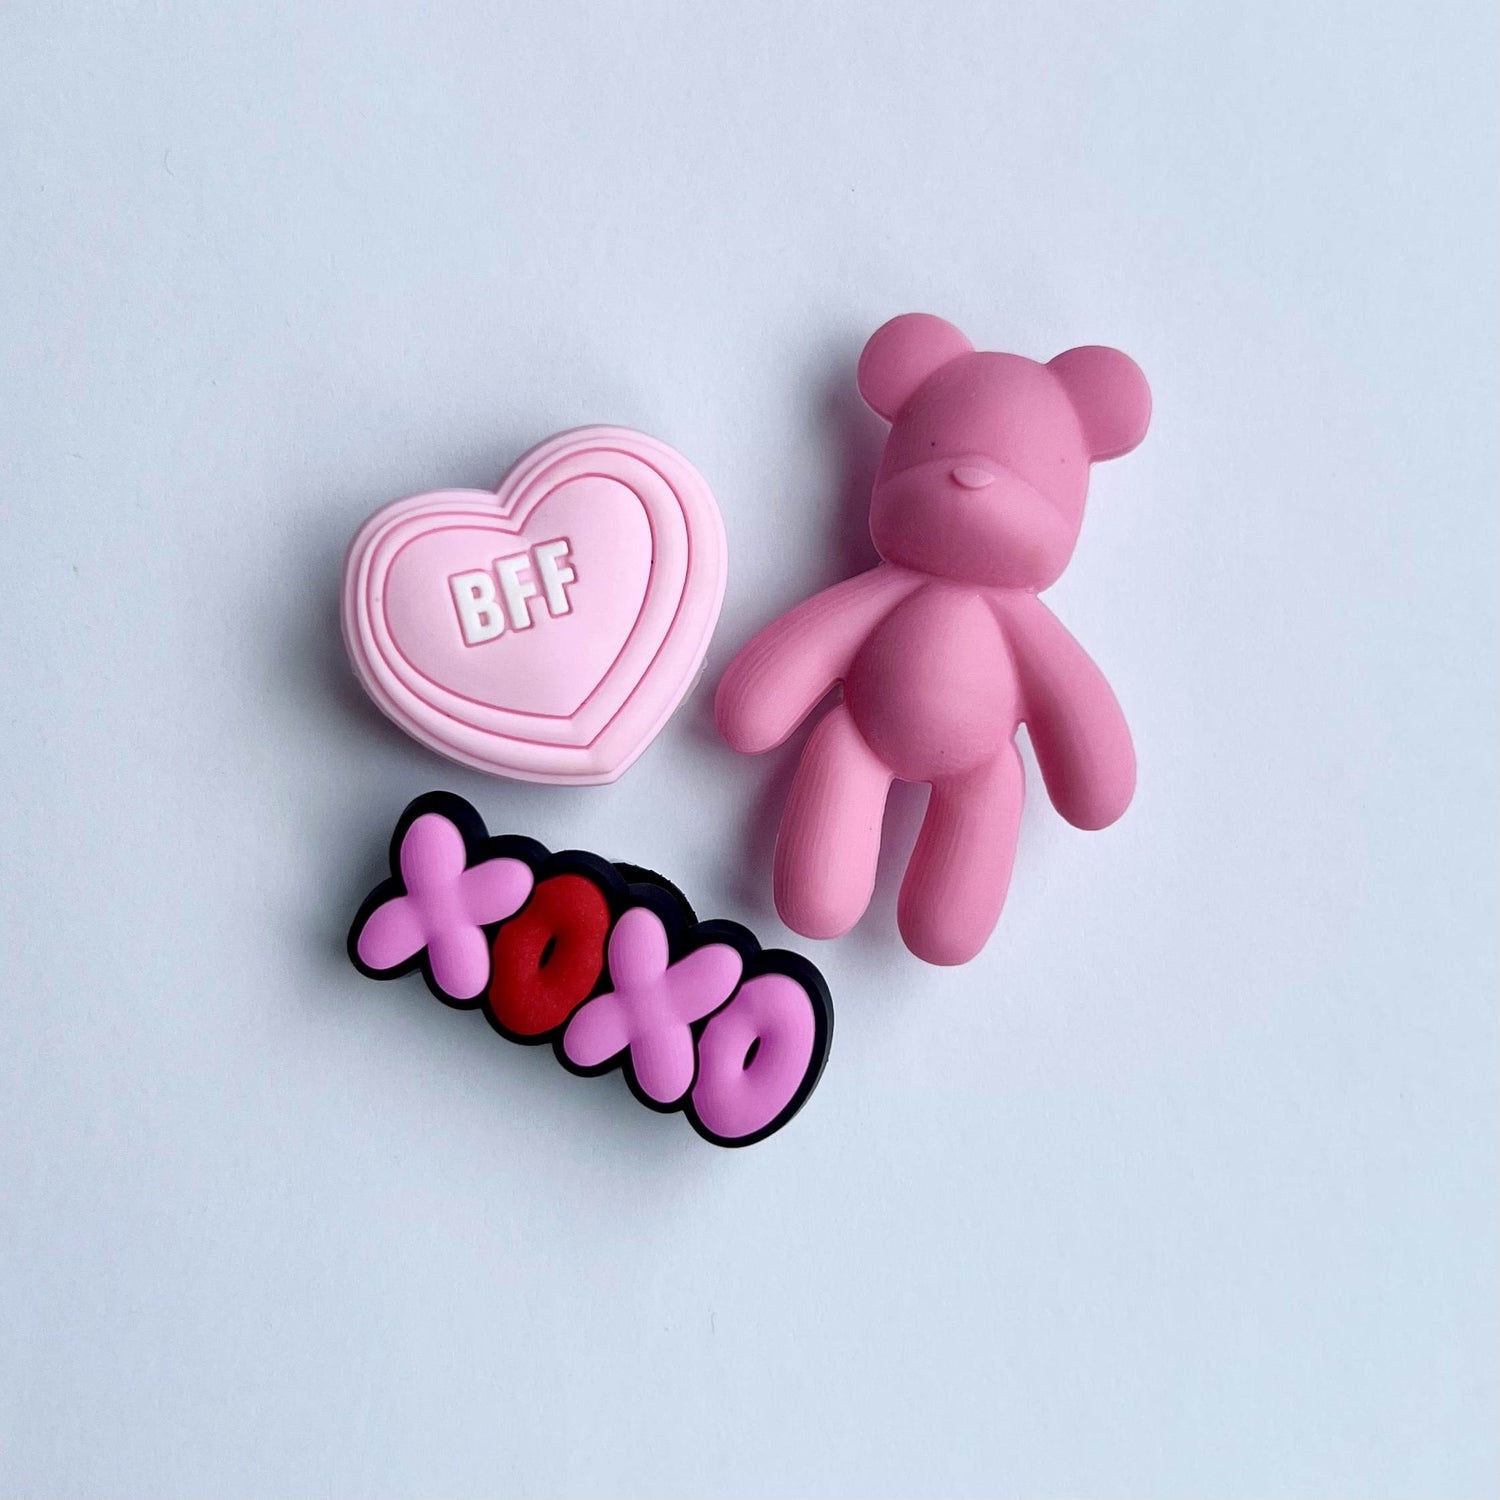 The Pink Heart Charms Pack